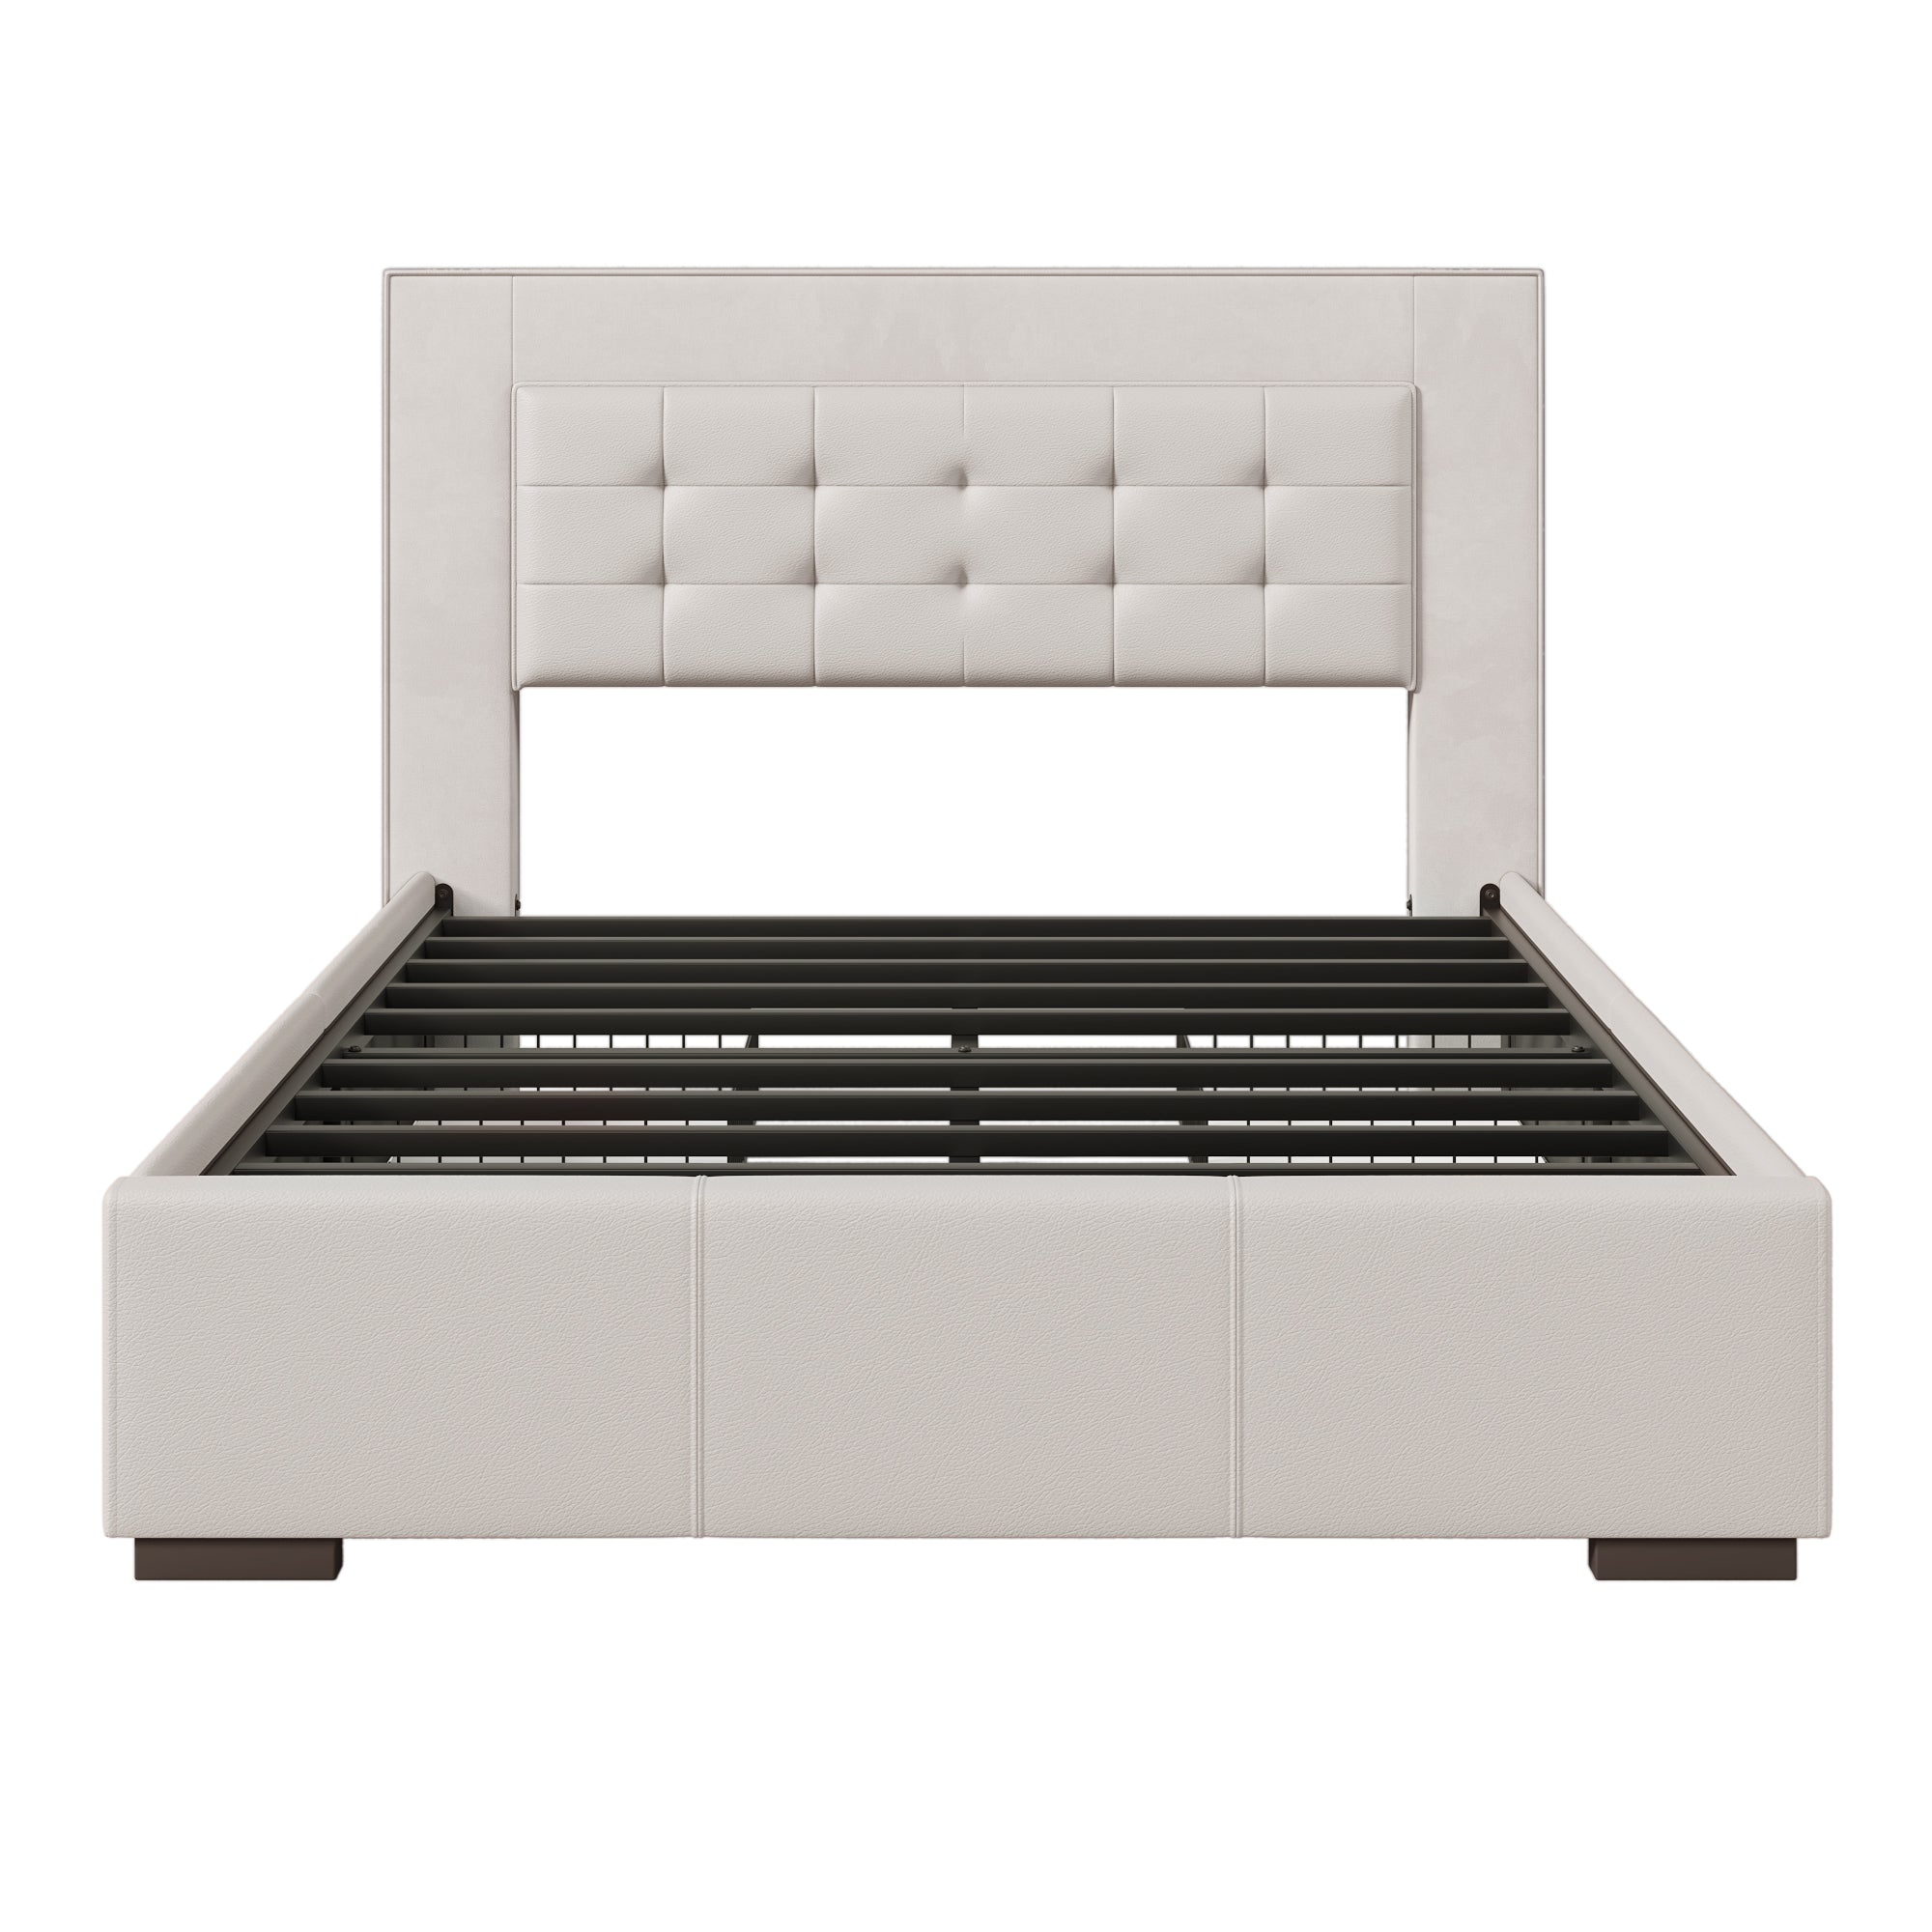 Modern Style Upholstered Queen Platform Bed Frame with box spring not required-queen-beige-metal-bed